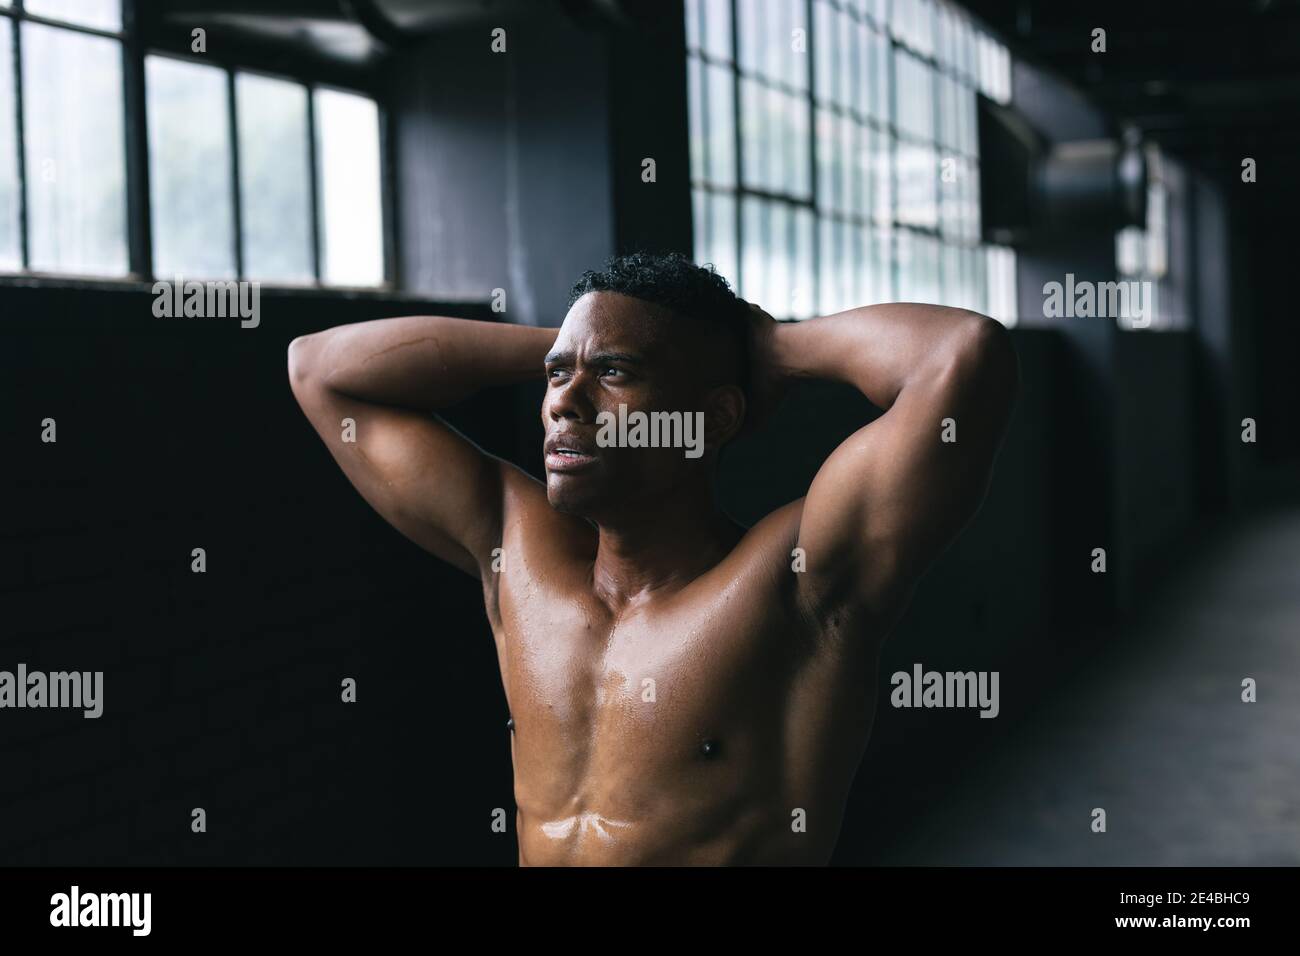 African american man standing and flexing his muscles in empty urban building Stock Photo